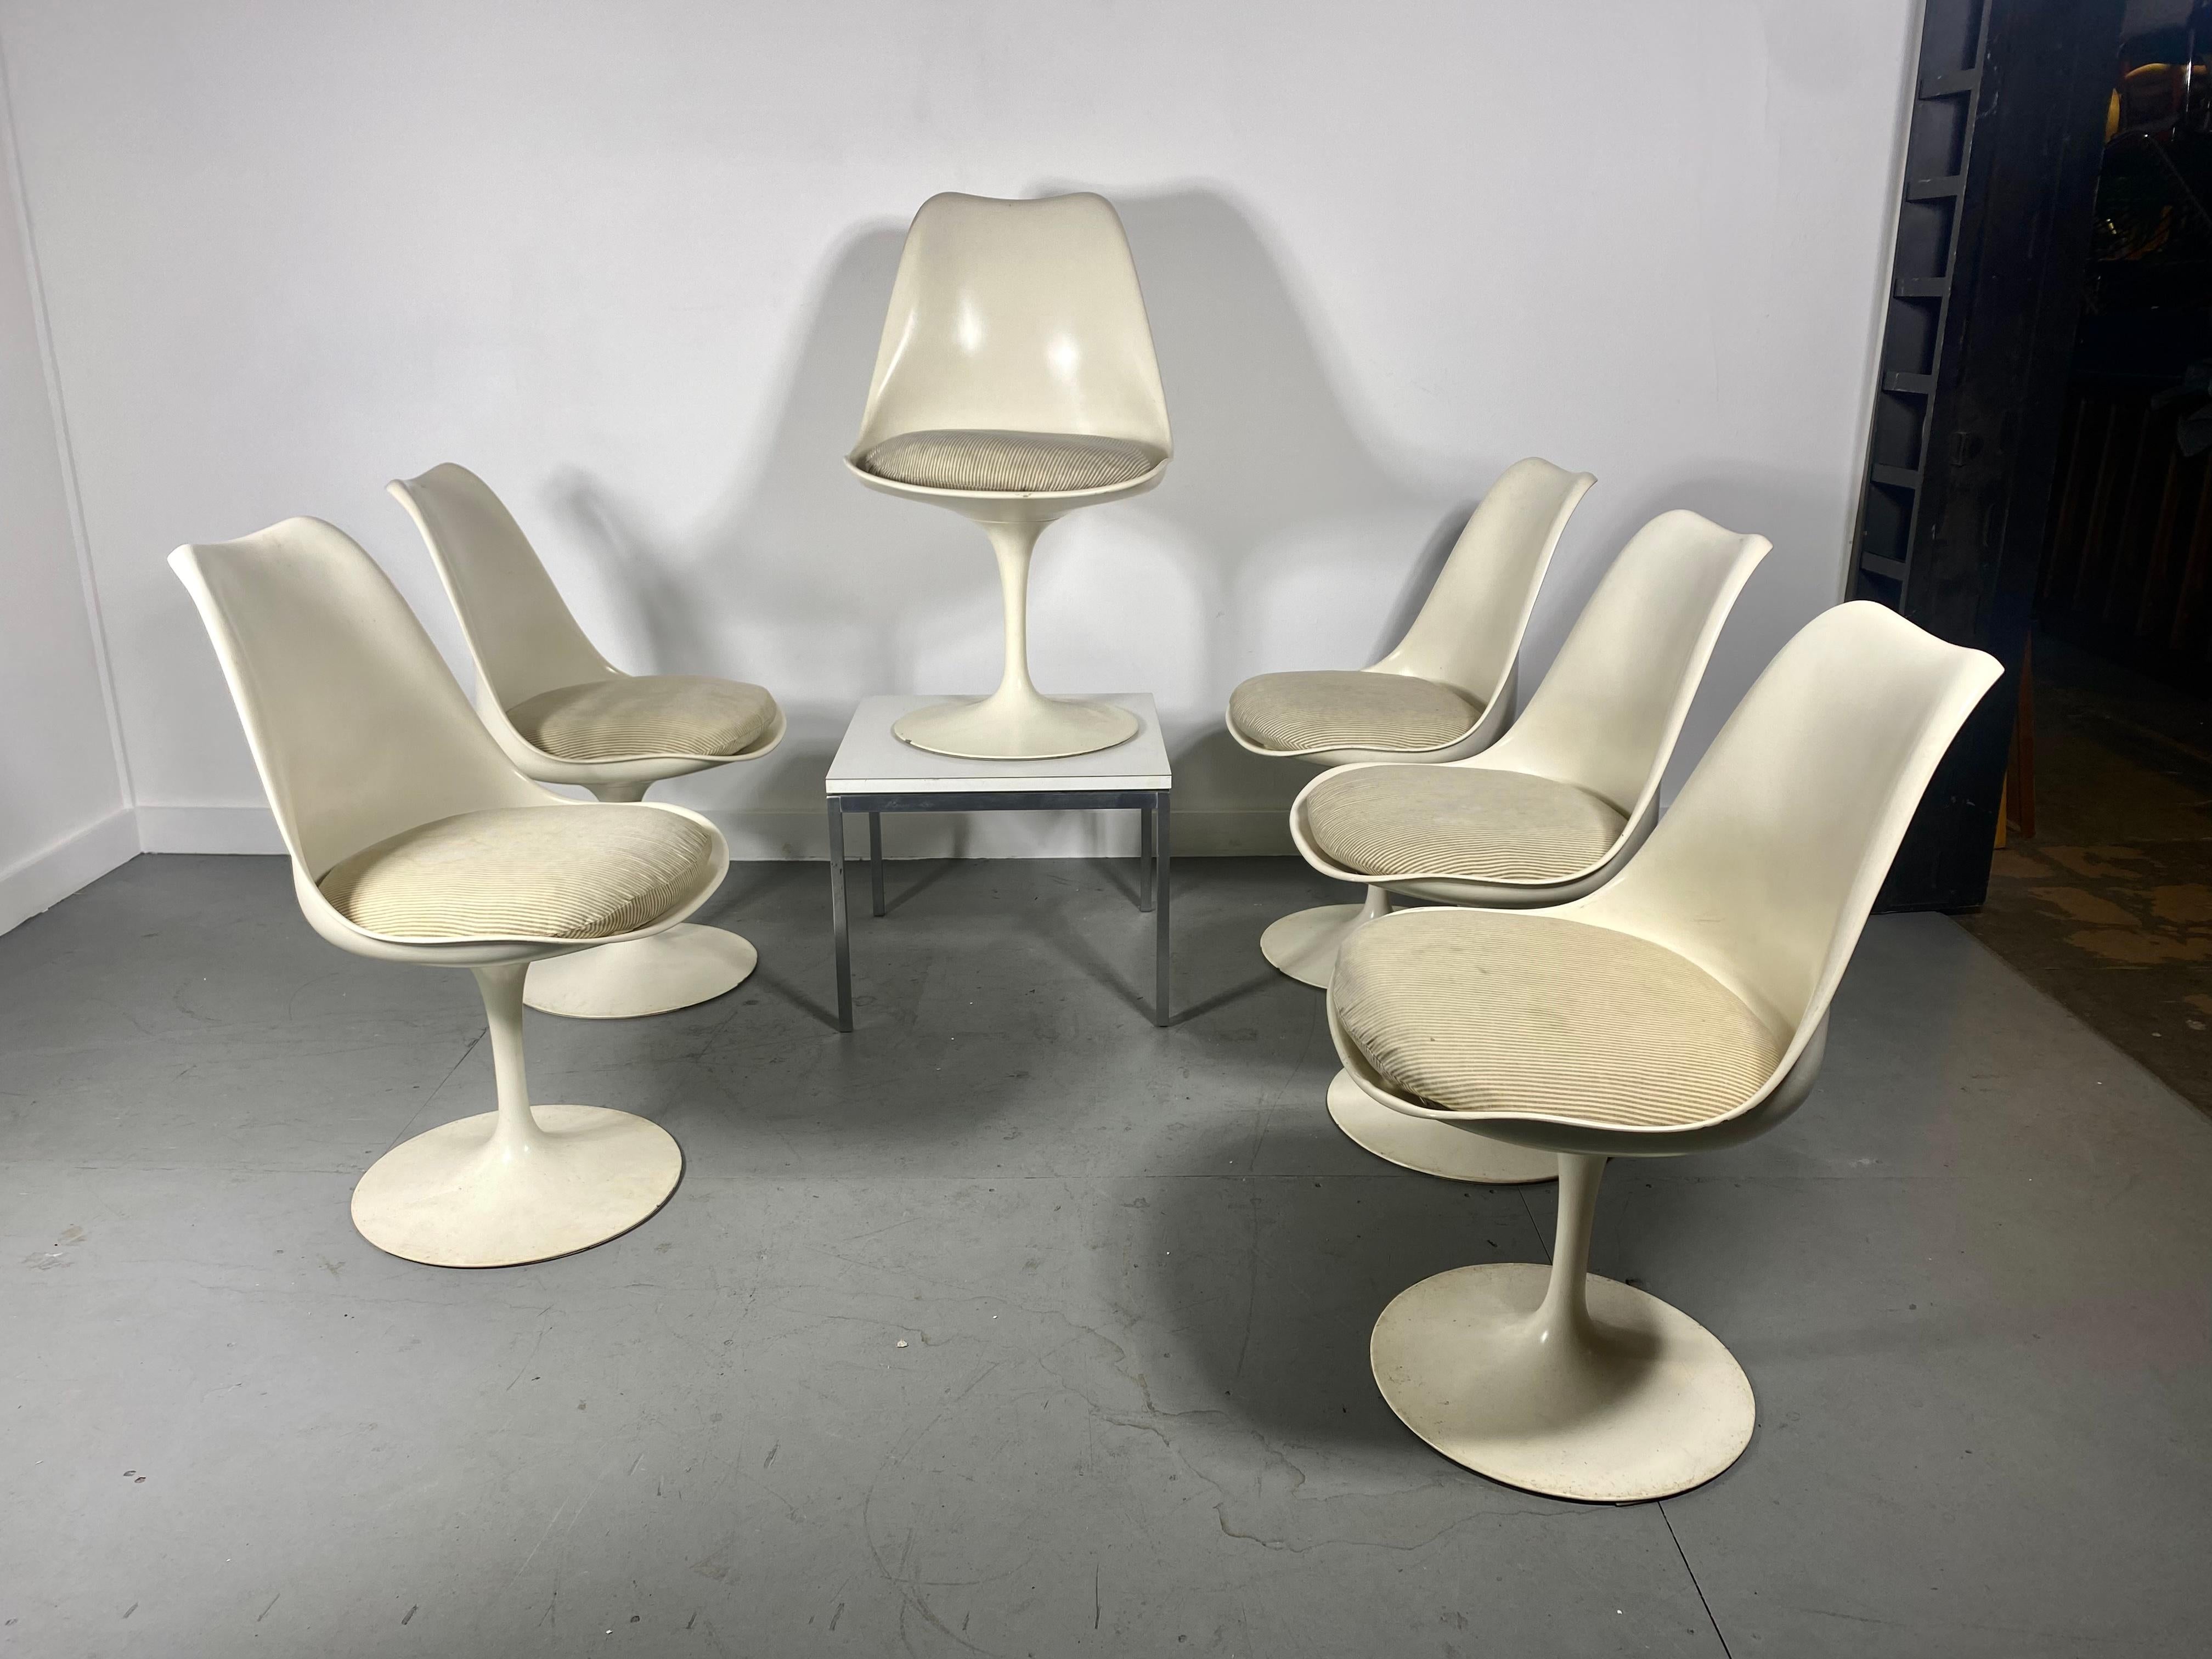 Mid-20th Century Early Production Eero Saarinen Tulip Dining Chairs Knoll, New York For Sale